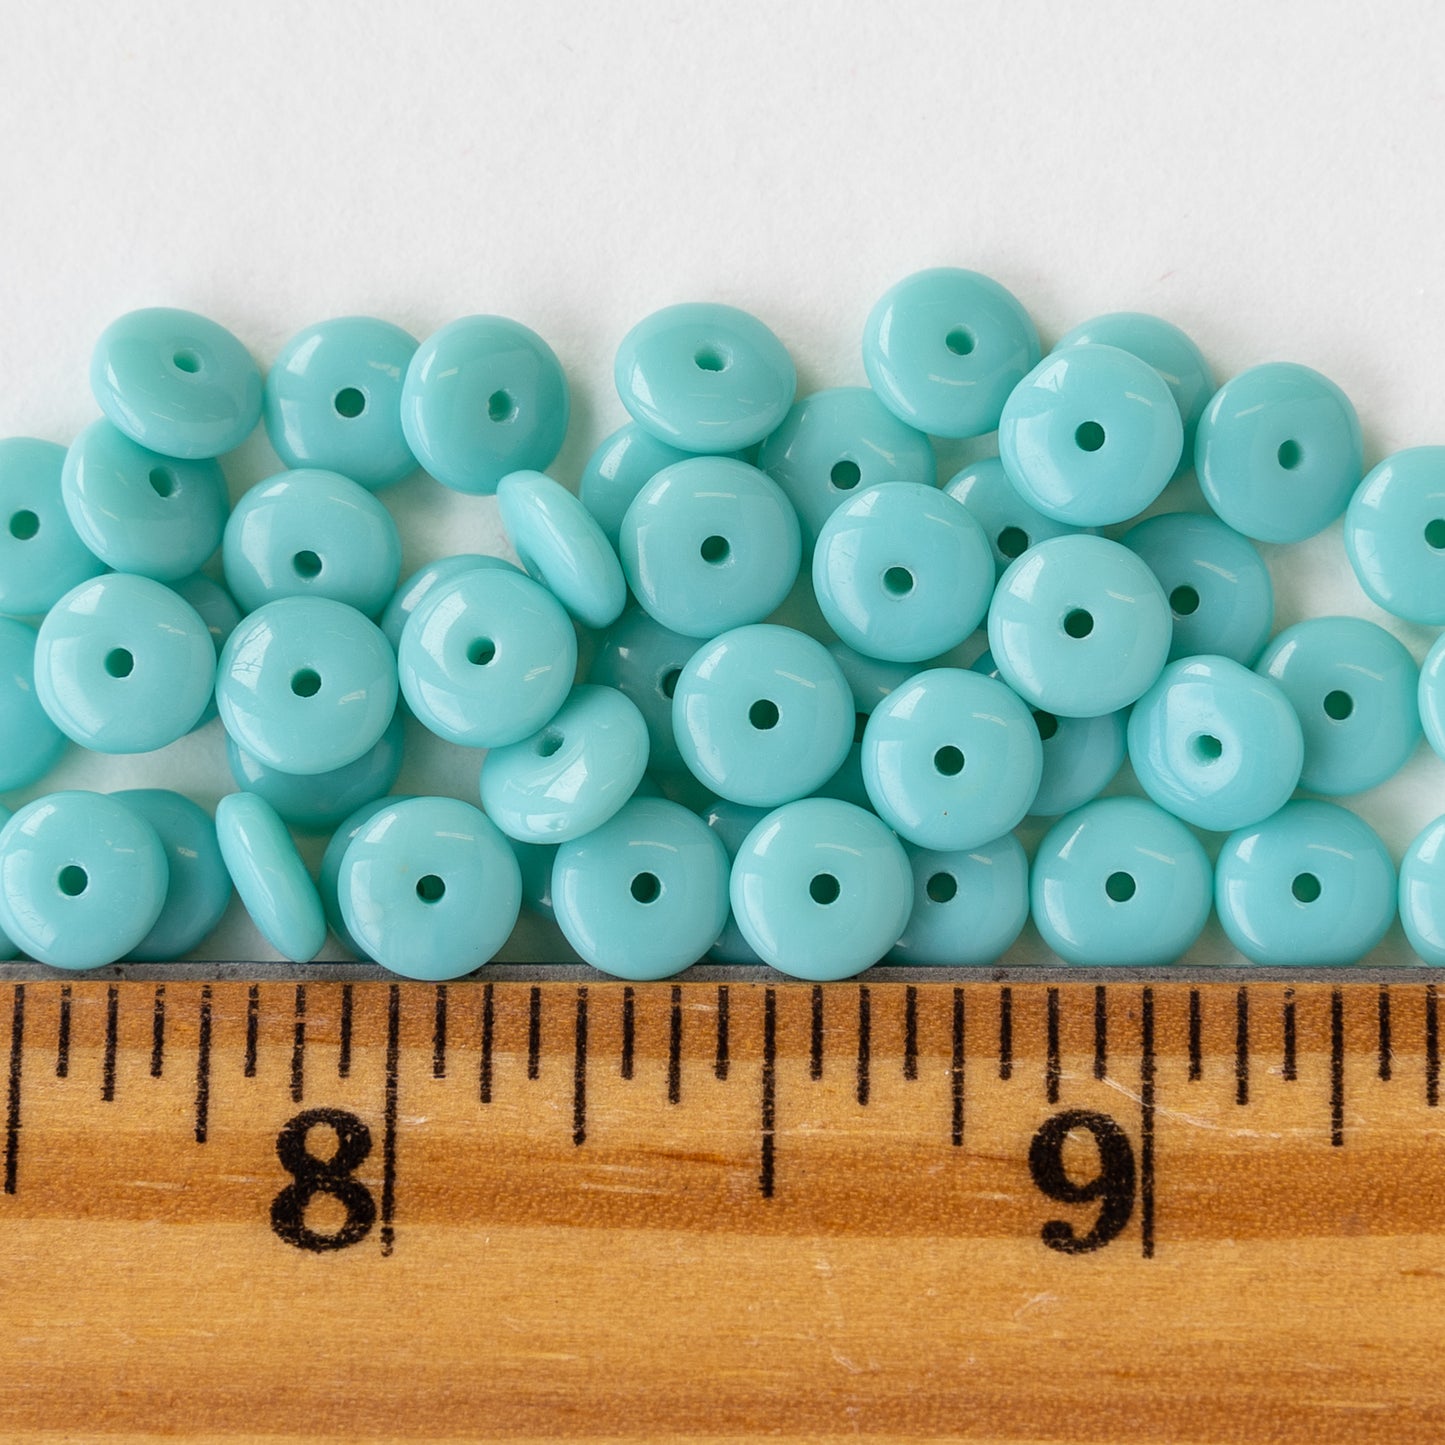 6mm Rondelle Beads - Opaque Blue Turquoise - 50 Beads